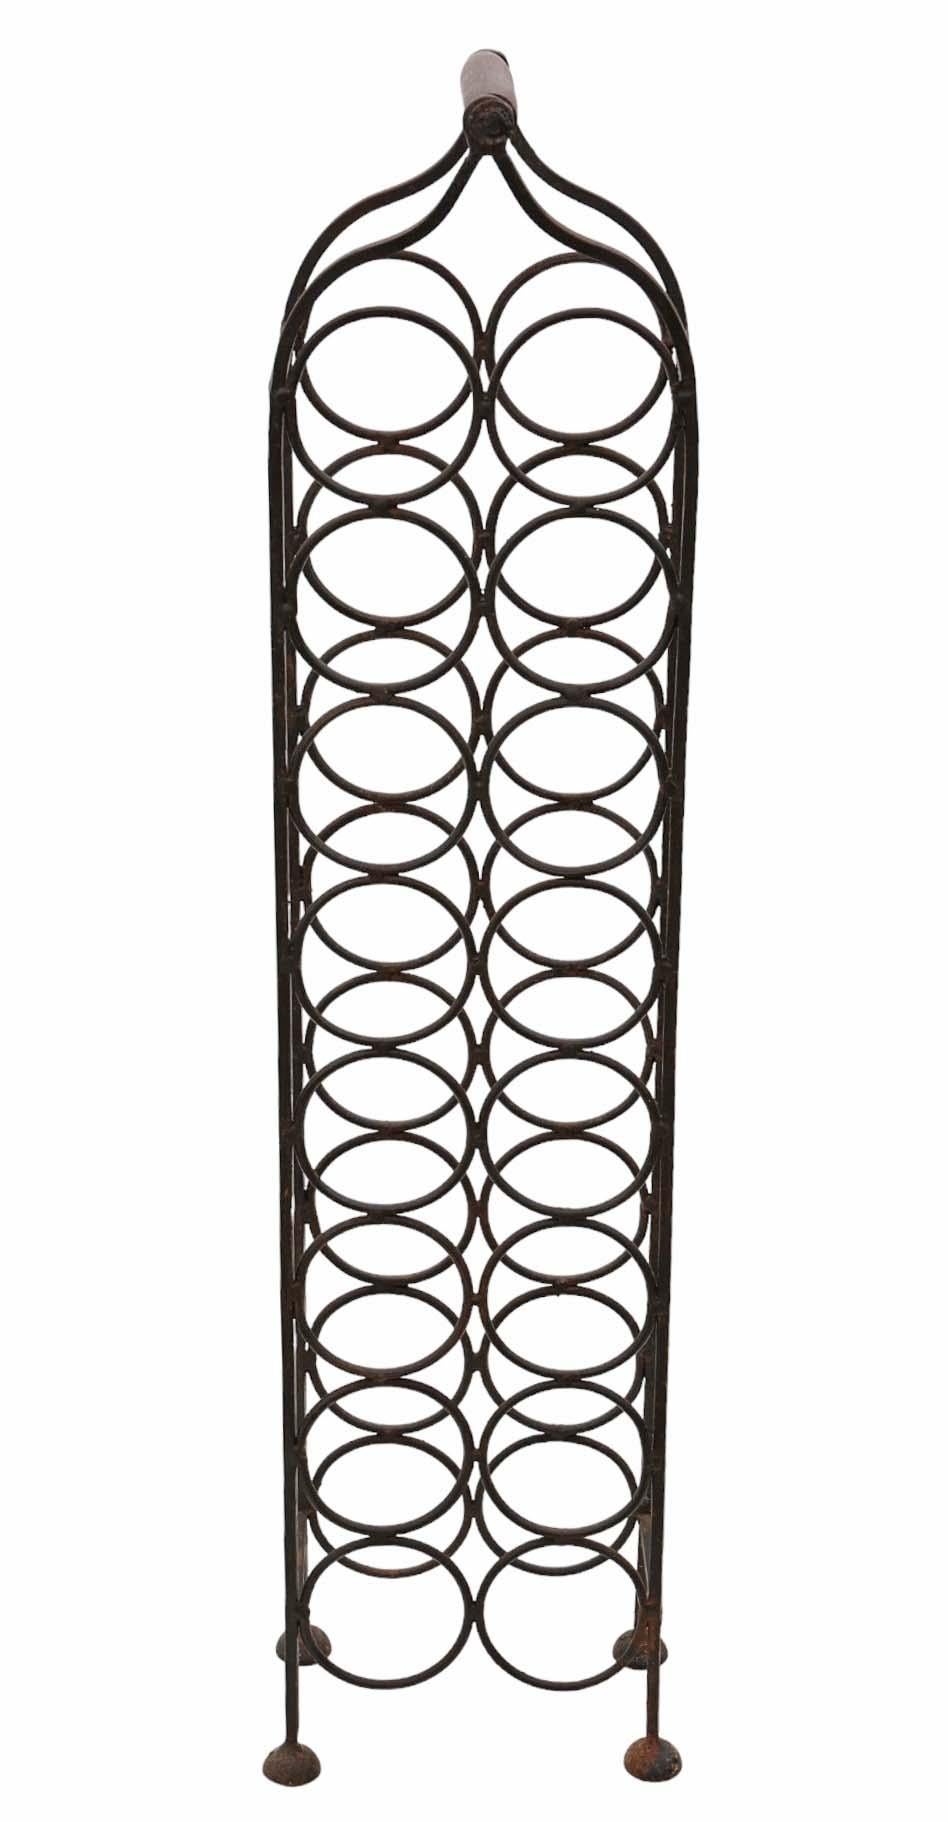 Antique wrought iron wine rack, dating back to circa 1920 or possibly earlier, designed to hold 16 bottles.

Embracing an old, rustic charm, this piece boasts sturdy construction with no loose joints or woodworm damage.

Featuring a desirable age